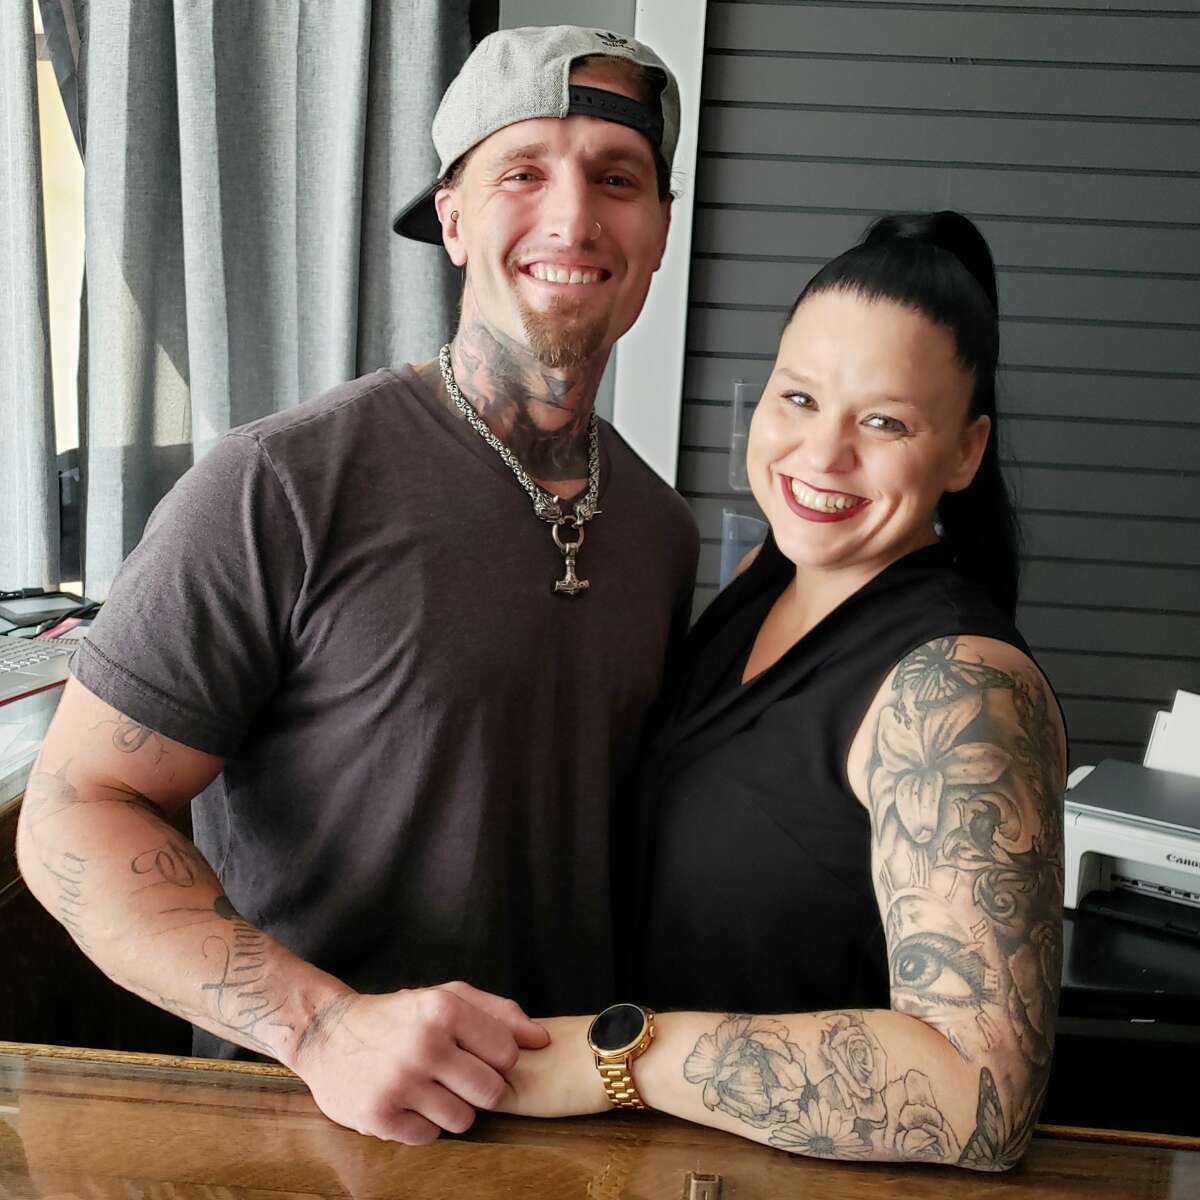 From left) Tattoo artist Brandon Mecam and Clean Lines Tattoo Company co-owner Kelly Stoudt opened their business in June 2021.